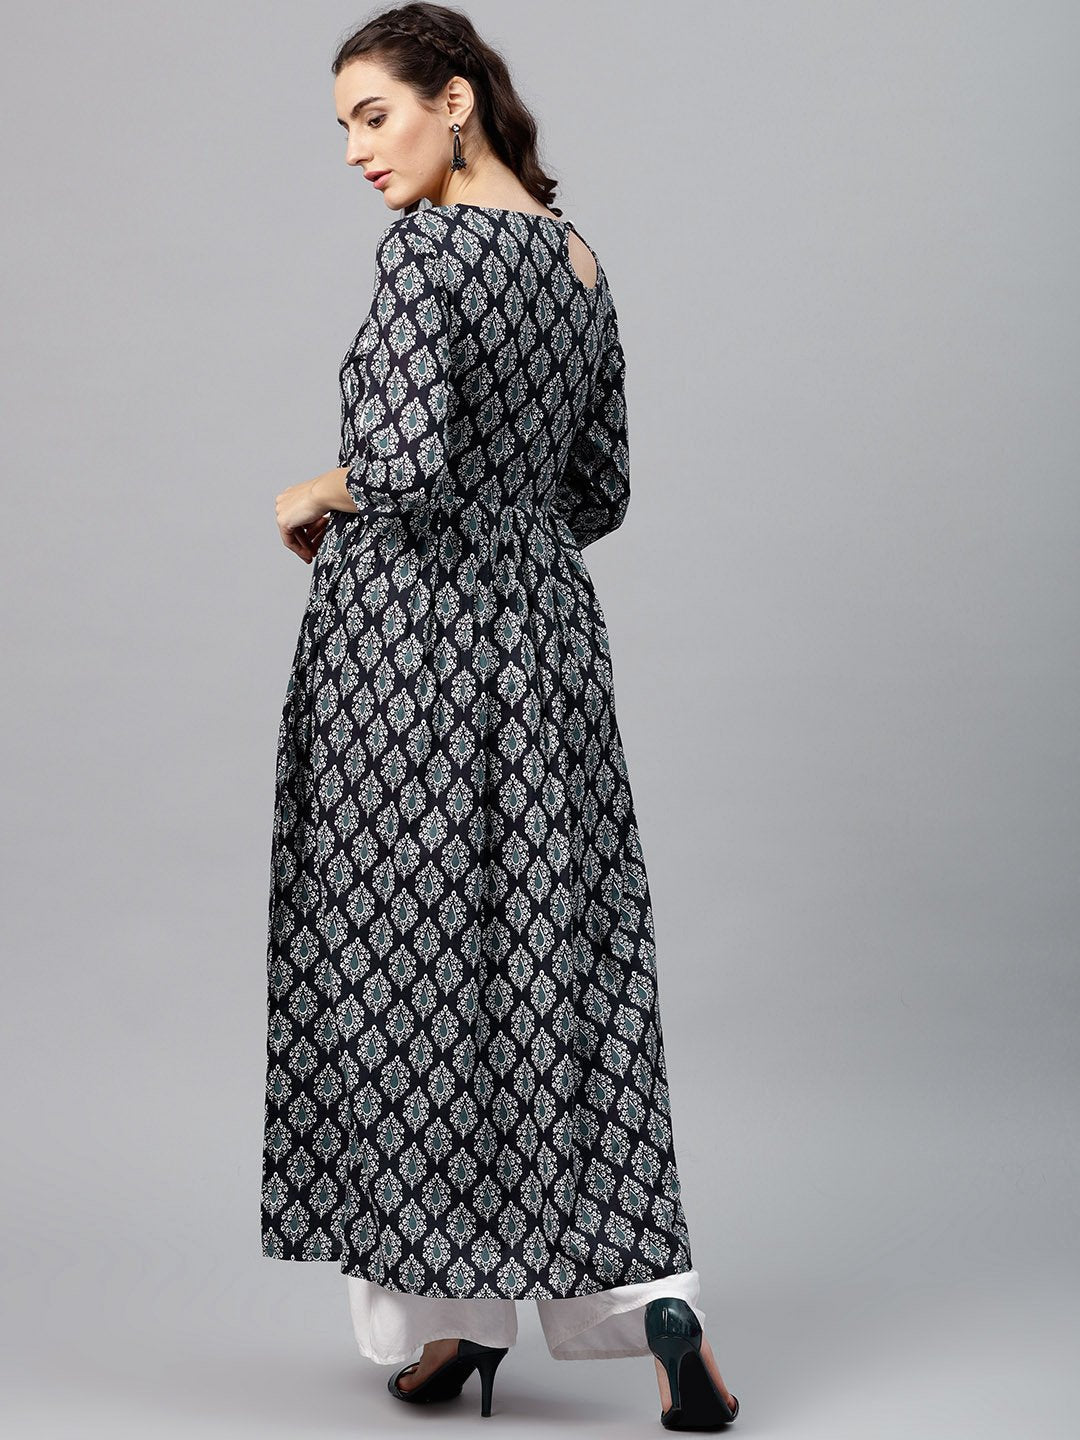 Women's Round Neck Black & White Printed Maxi Dress With 3/4 Sleeves And Emblished With Tassels - Nayo Clothing